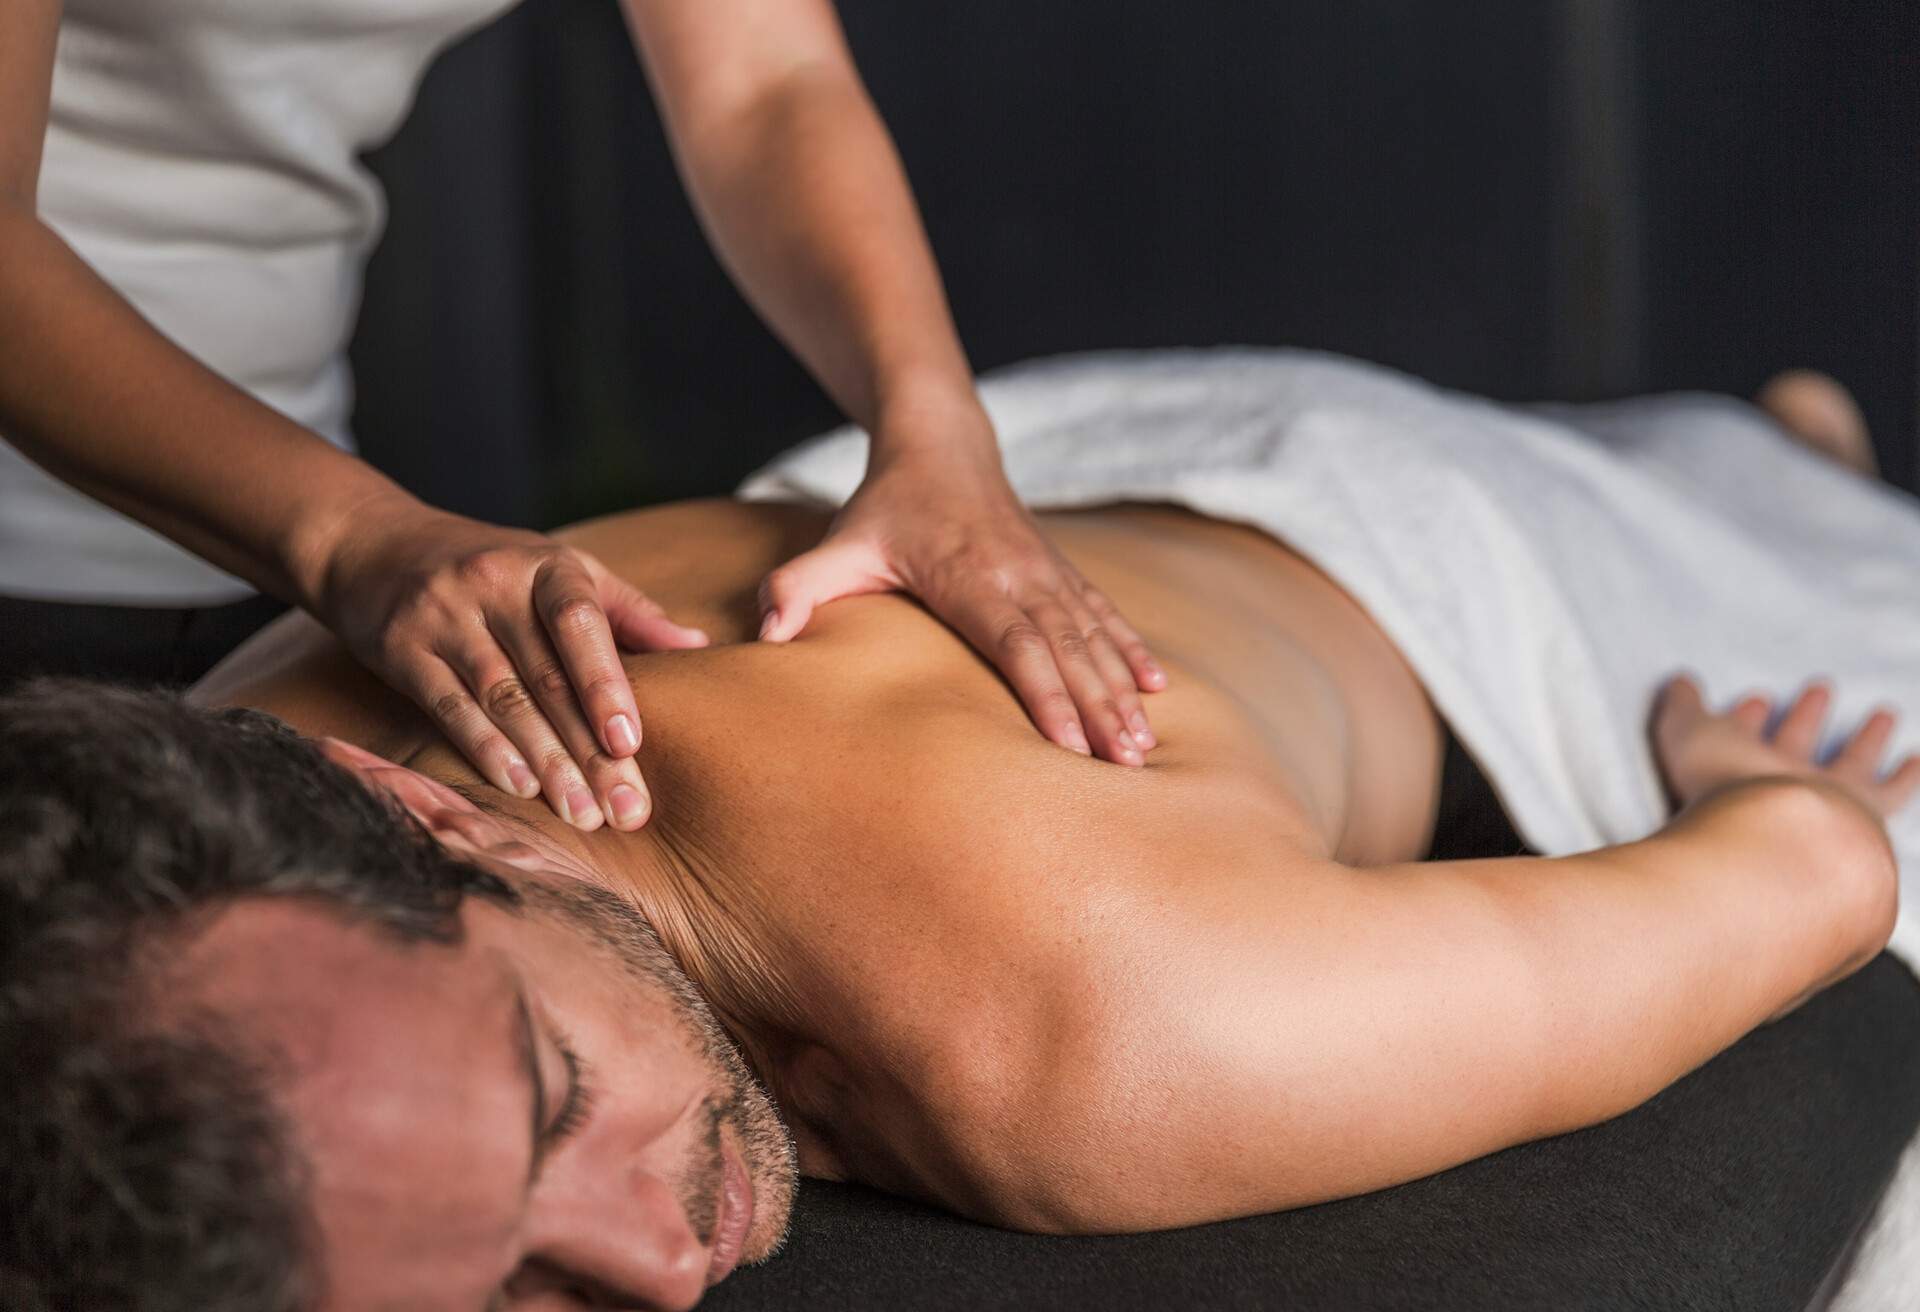  A man lies in a spa bed and receives a back massage.